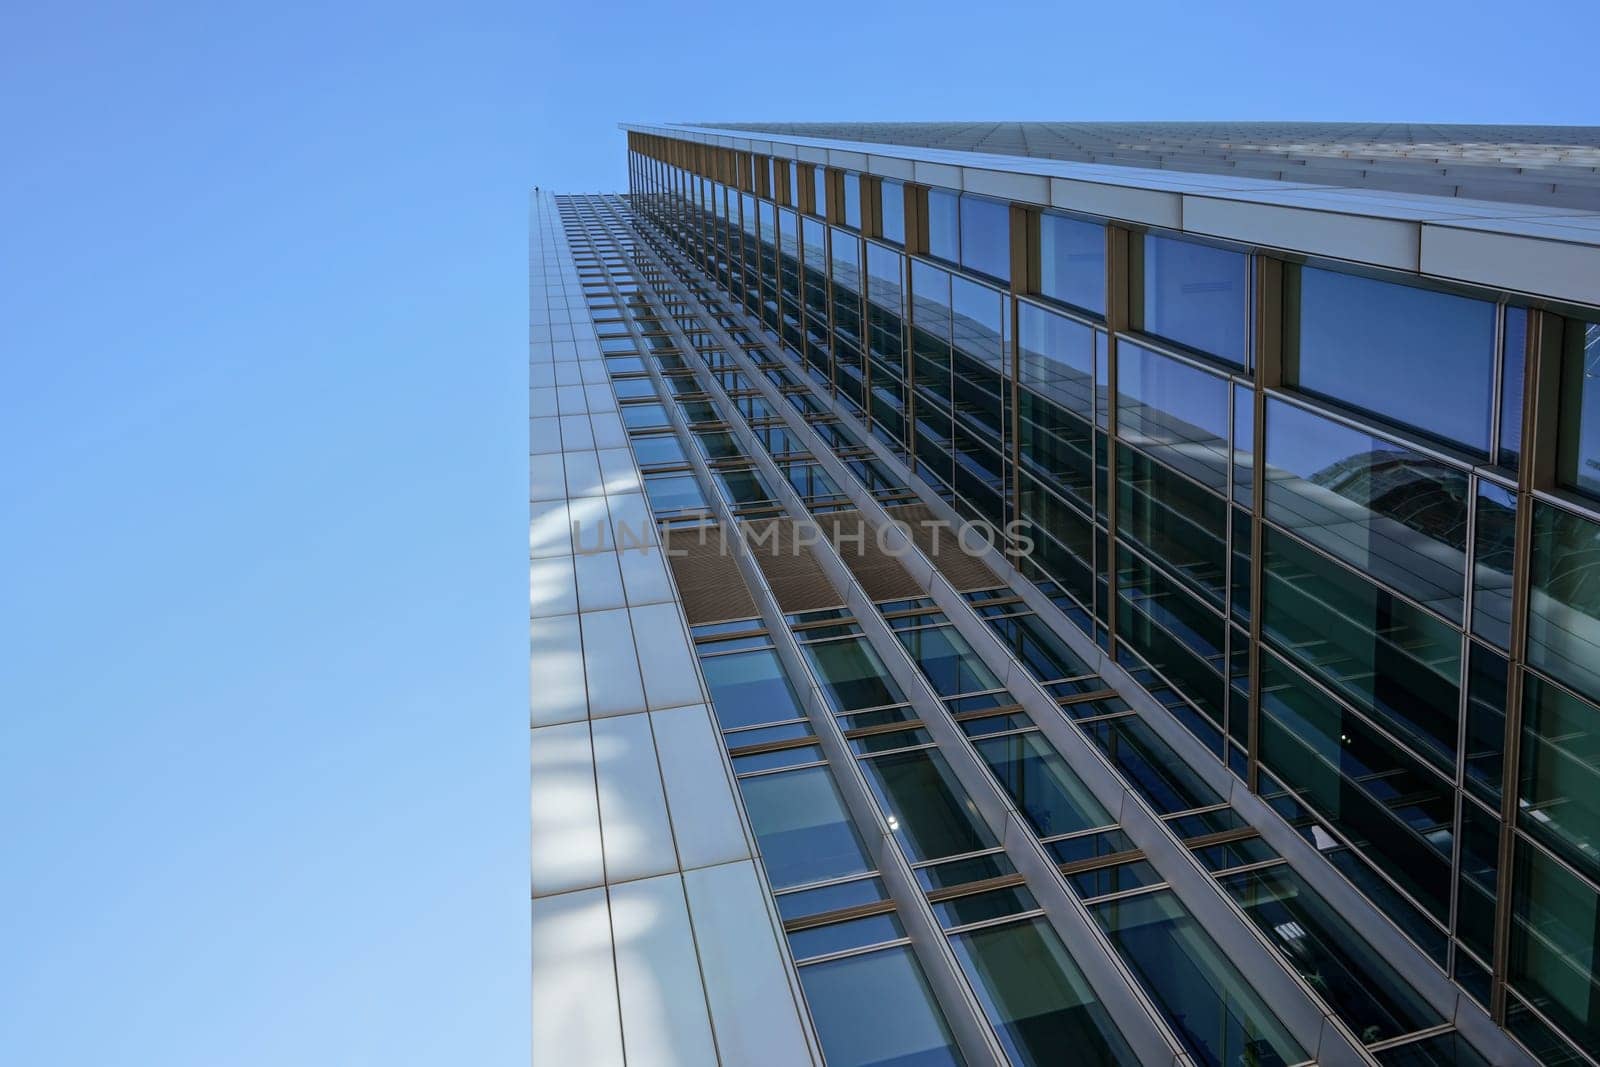 London, United Kingdom - February 03, 2019: Looking up glass and steel "10 Upper Bank Street" skyscraper at Canary Wharf. It's one of tallest buildings in UK capital, designed by Kohn Pendersen Fox by Ivanko